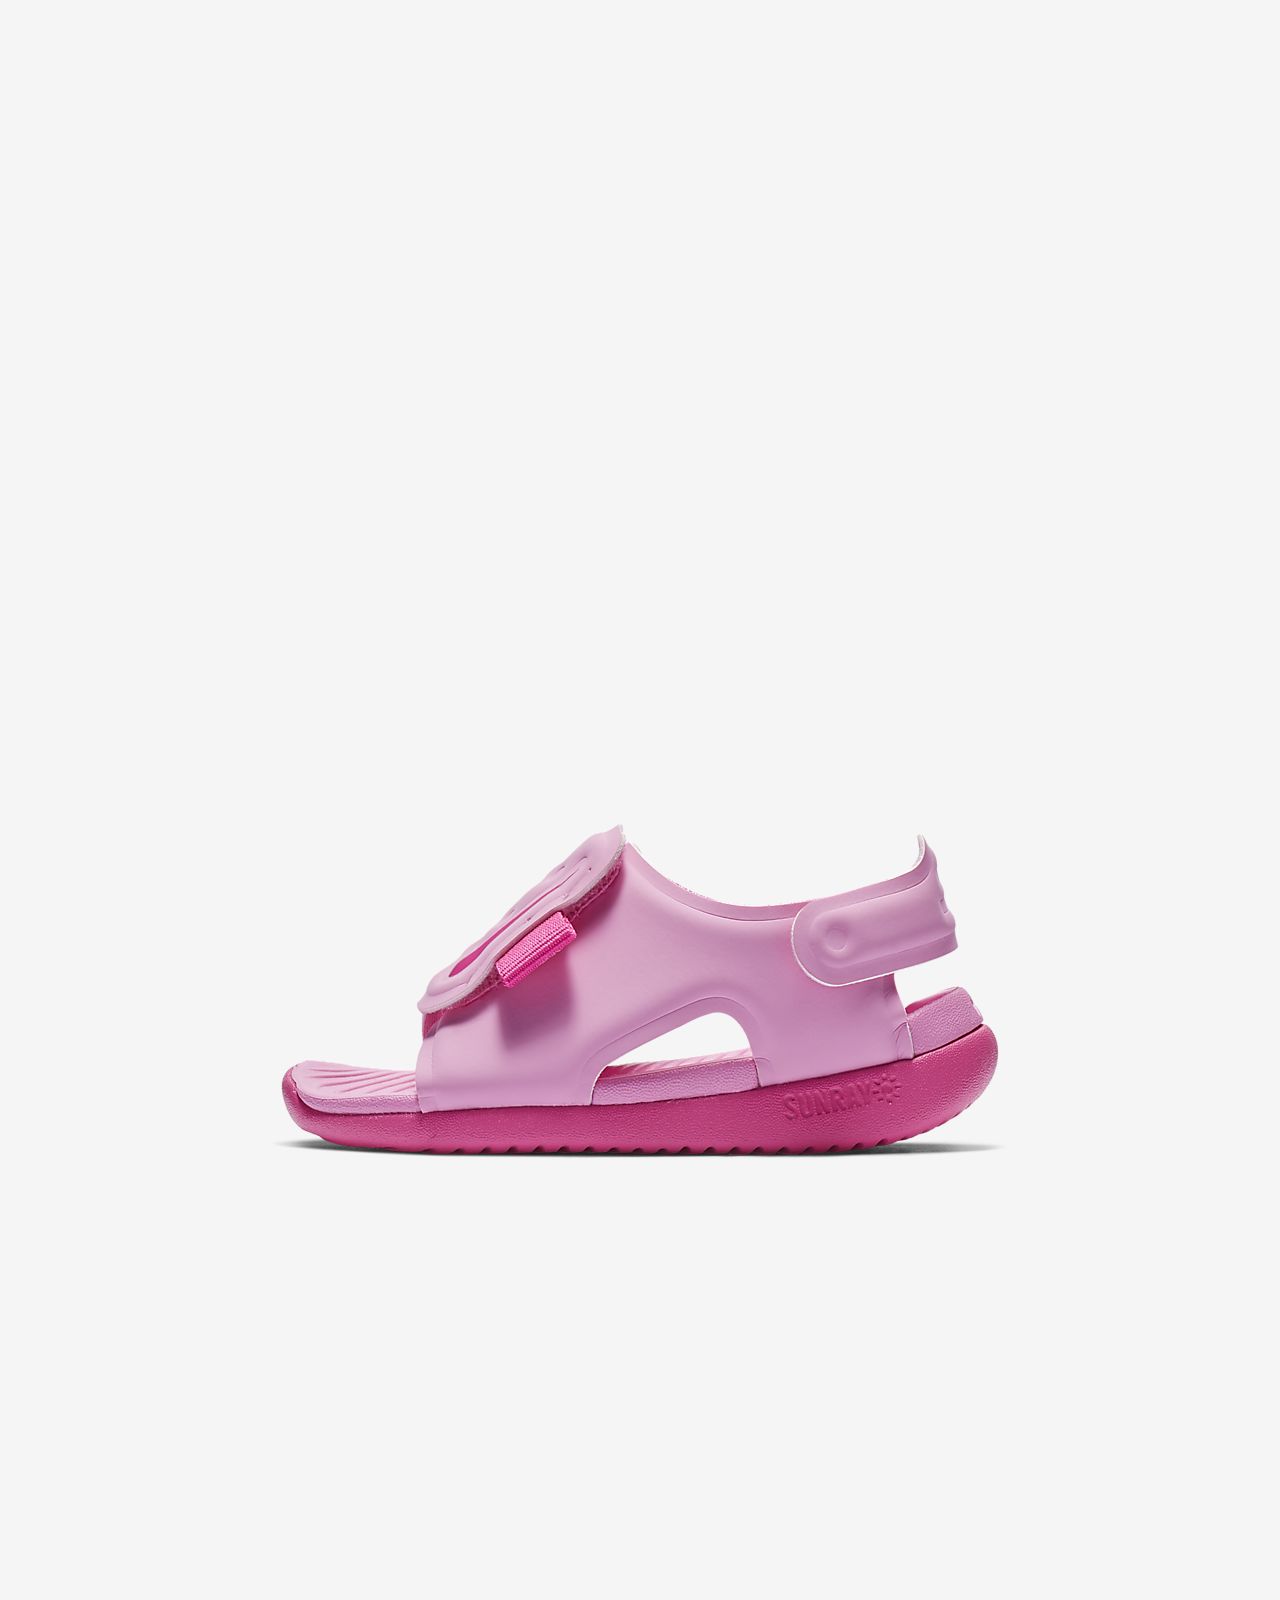 pink nike sandals for toddlers